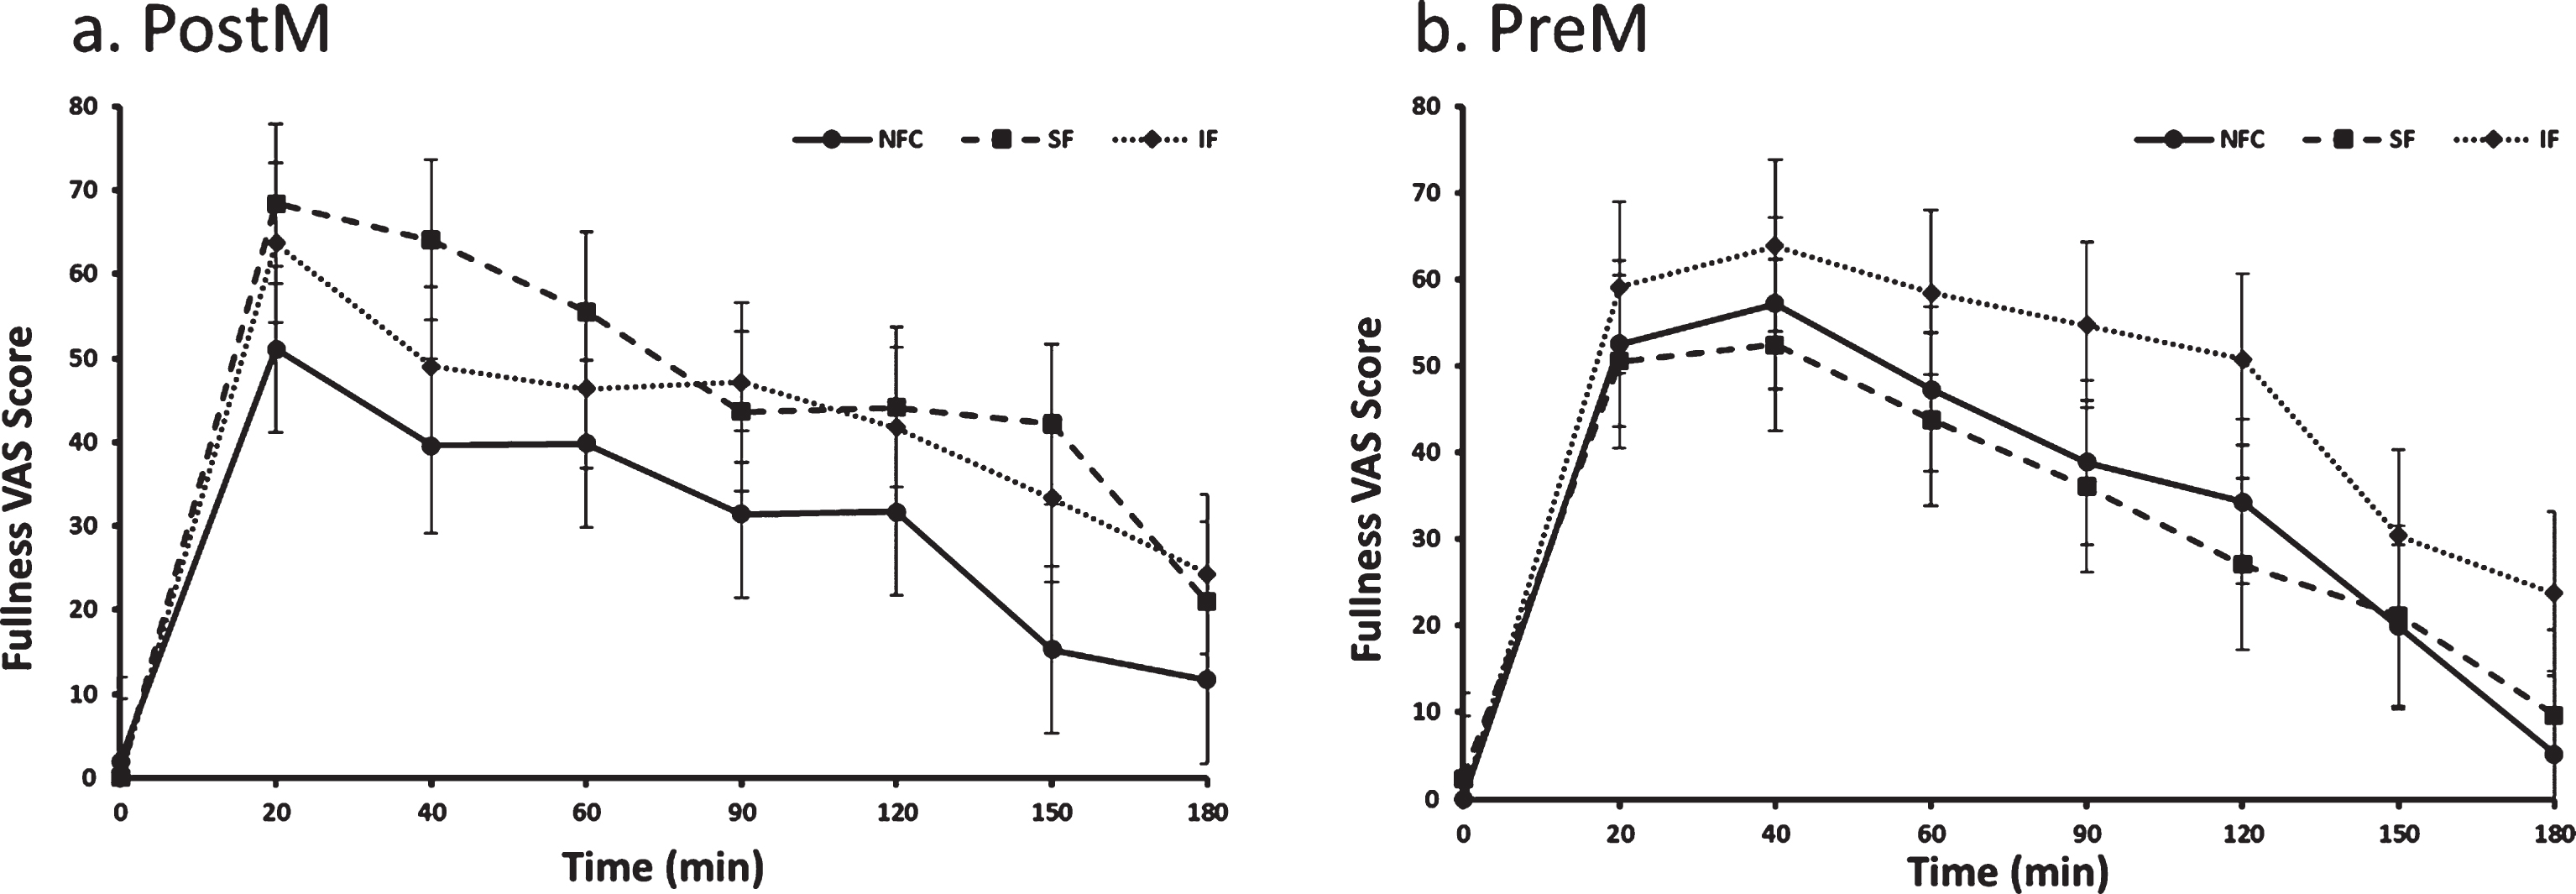 Fullness variation in Postmenopausal (PostM, n = 10) and Premenopausal (PreM, n = 9) women after NFC-No Fiber Control, IF-Insoluble Fiber, SF-Soluble Fiber meals. Values are the means±SEM at each time point. Different letters at the same time point denotes significant difference, p < 0.05.